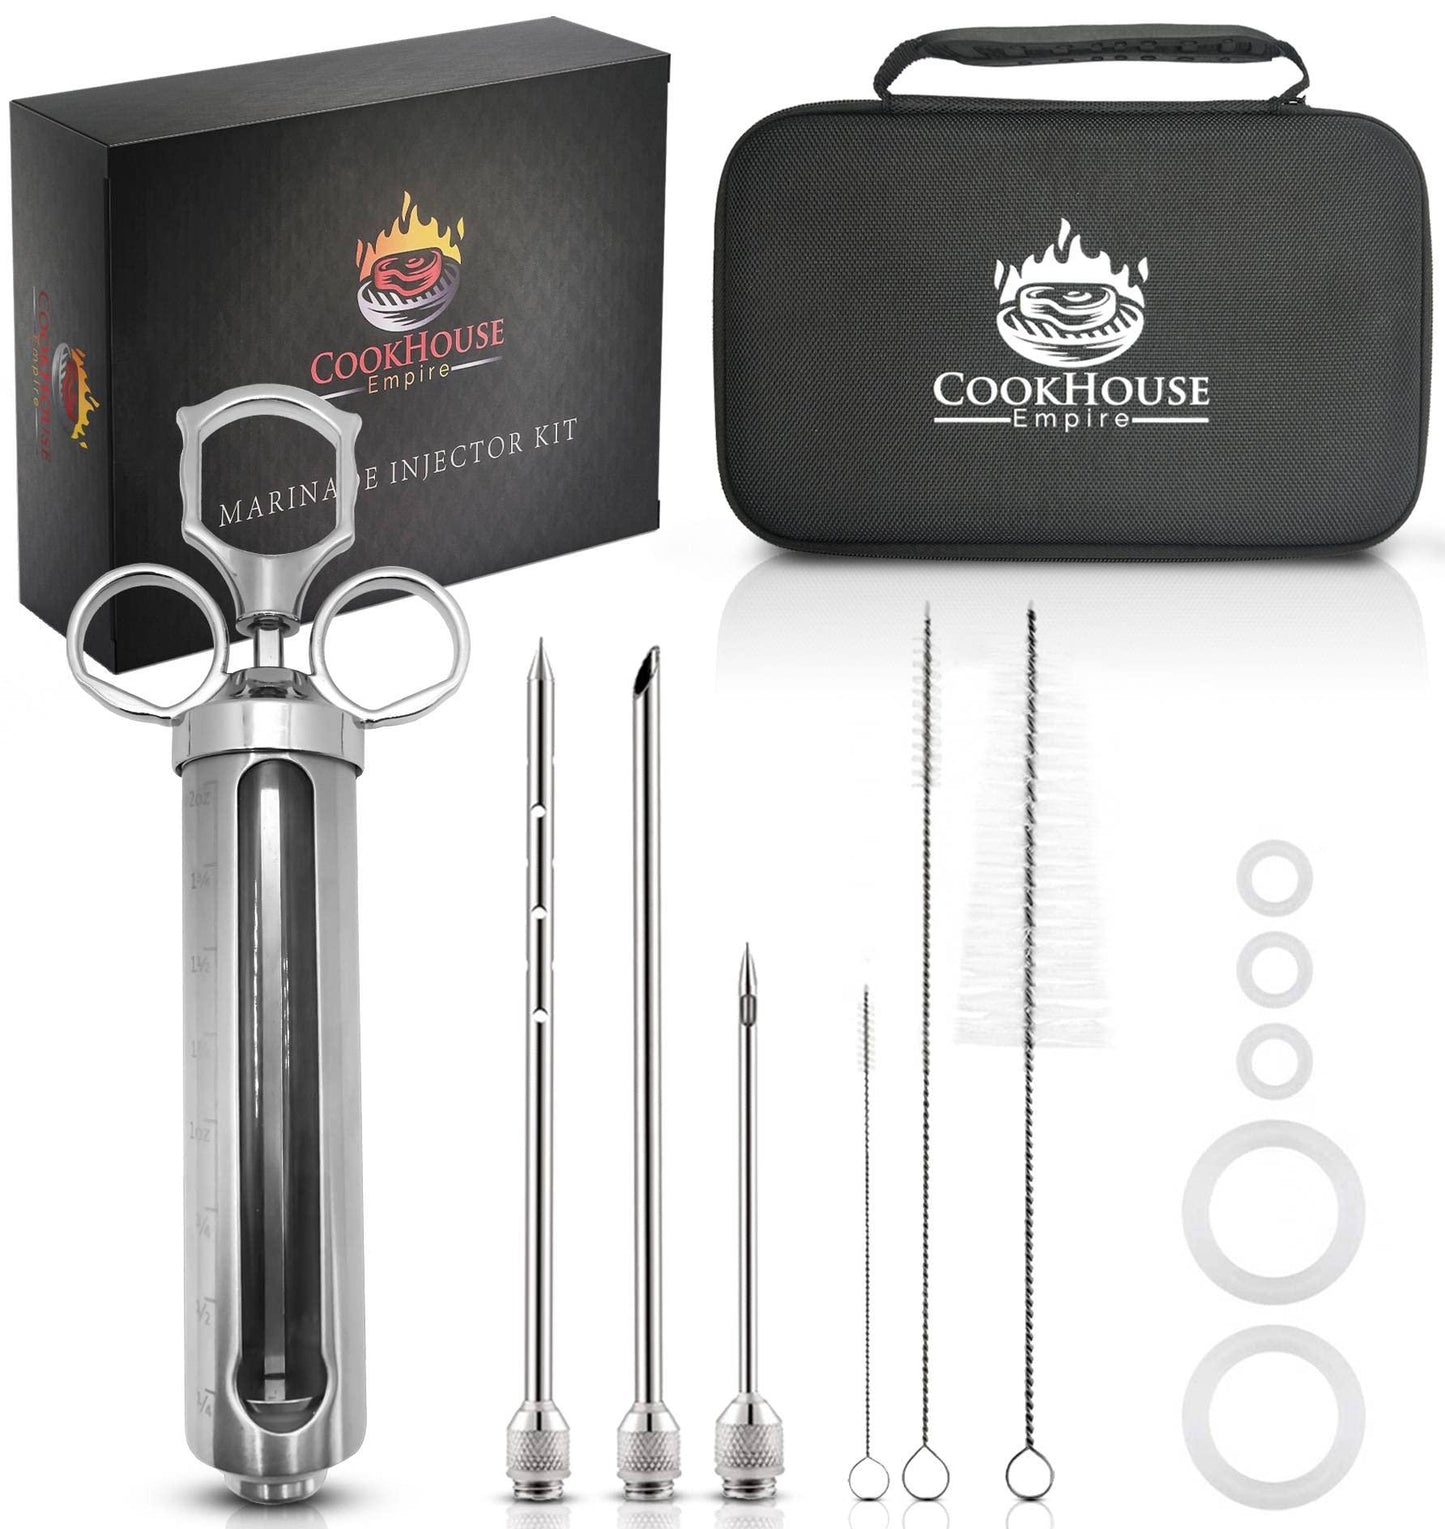 Meat Injectors for Smoking - Stainless Steel Marinade Injector Kit with Case and Window for BBQ, Grilling - 3 Syringe Needles for Injection of Flavor, Sauce - Food Injector for Turkey, Beef, Brisket - CookCave